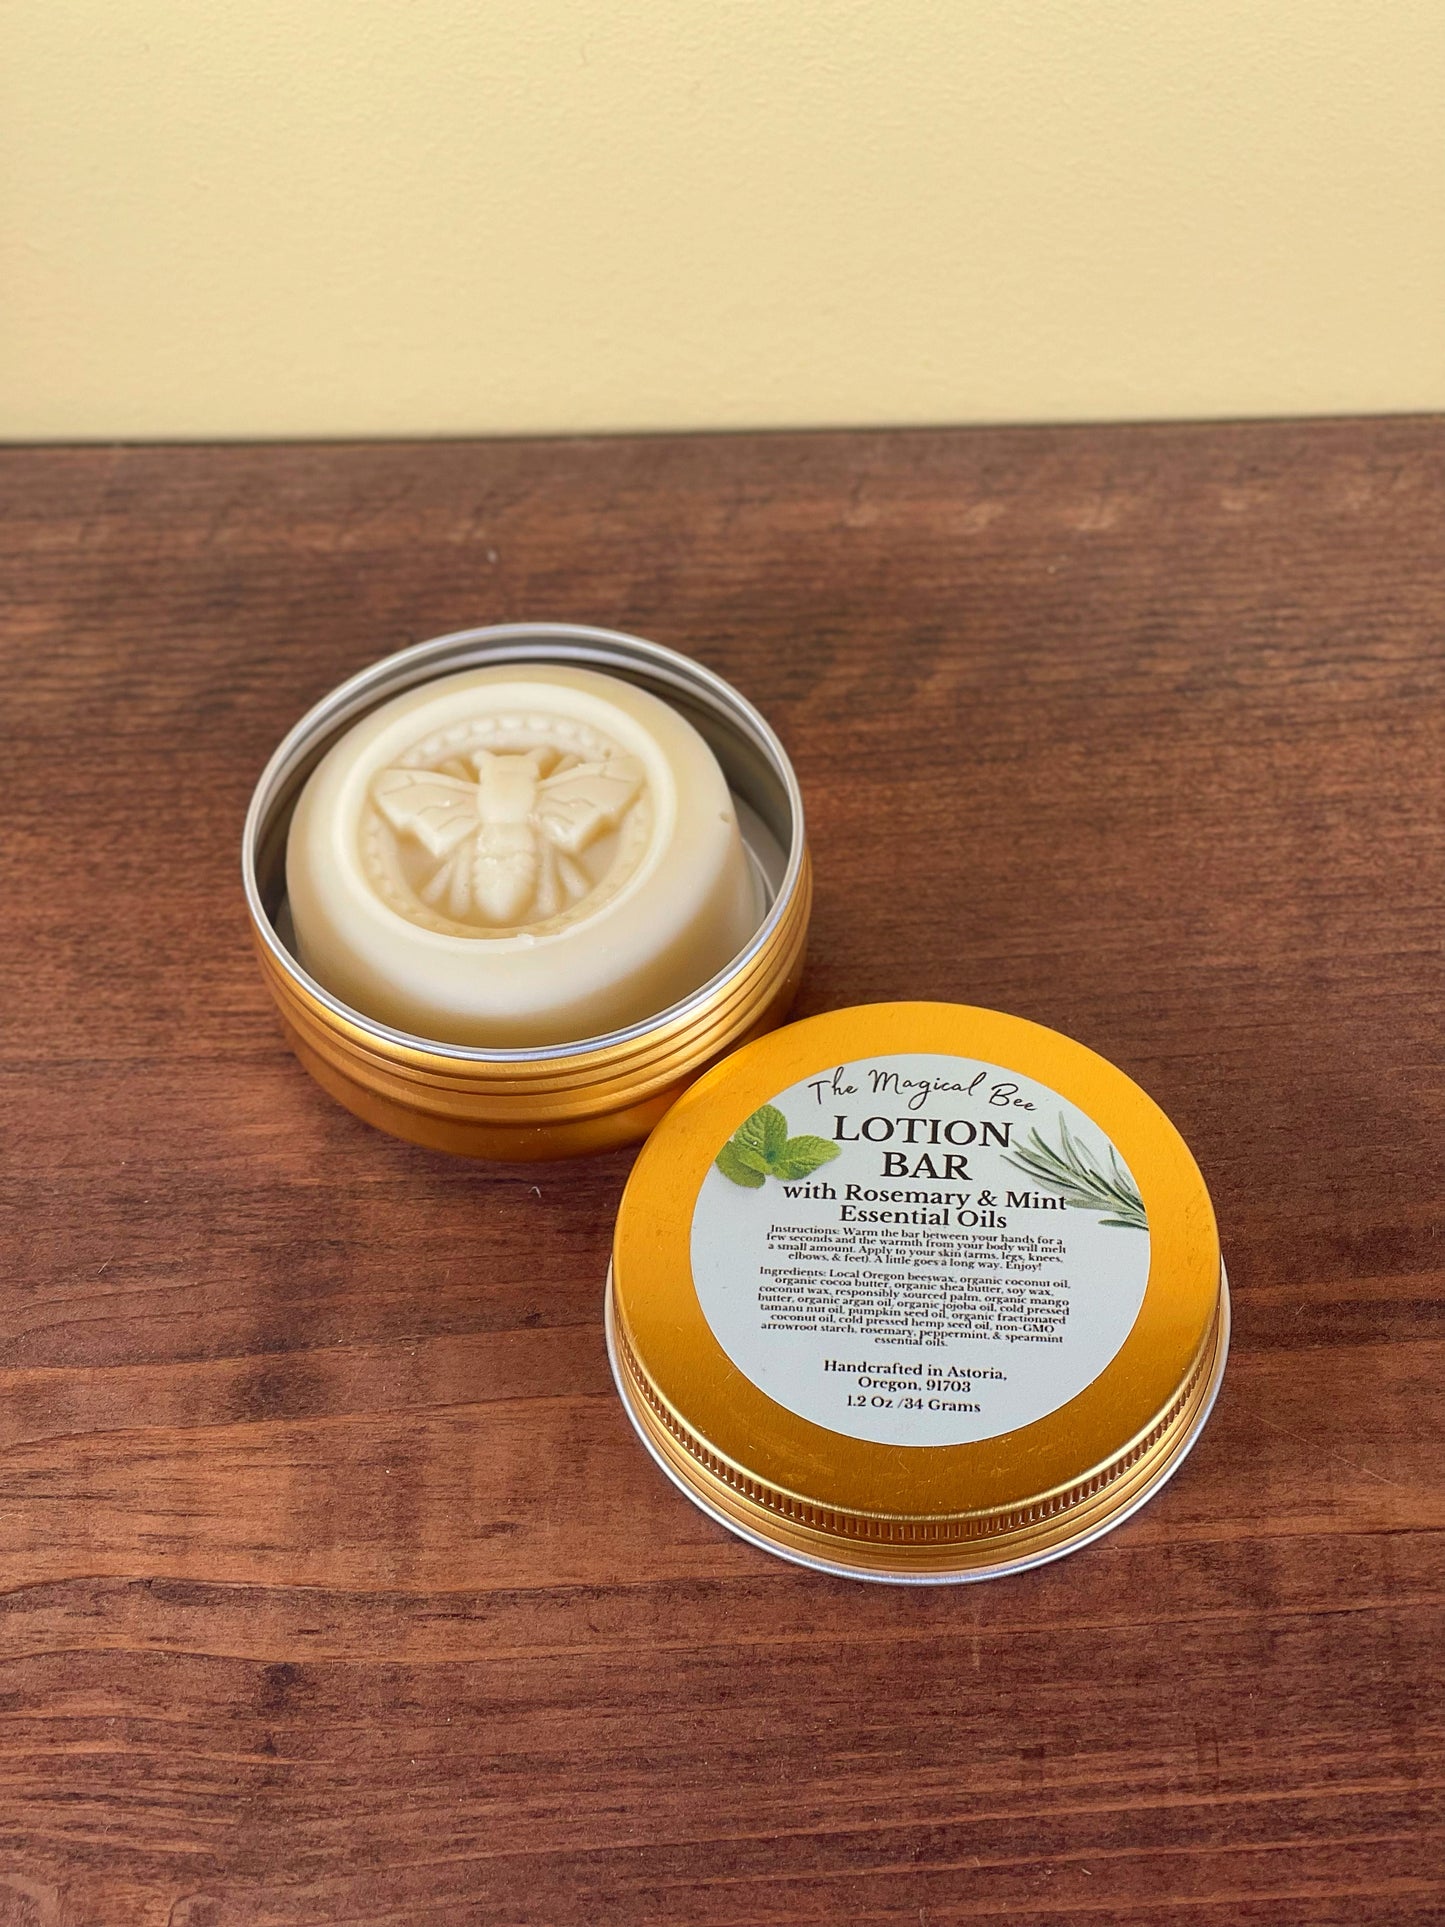 Lotion Bar with Rosemary & Mint Essential Oils